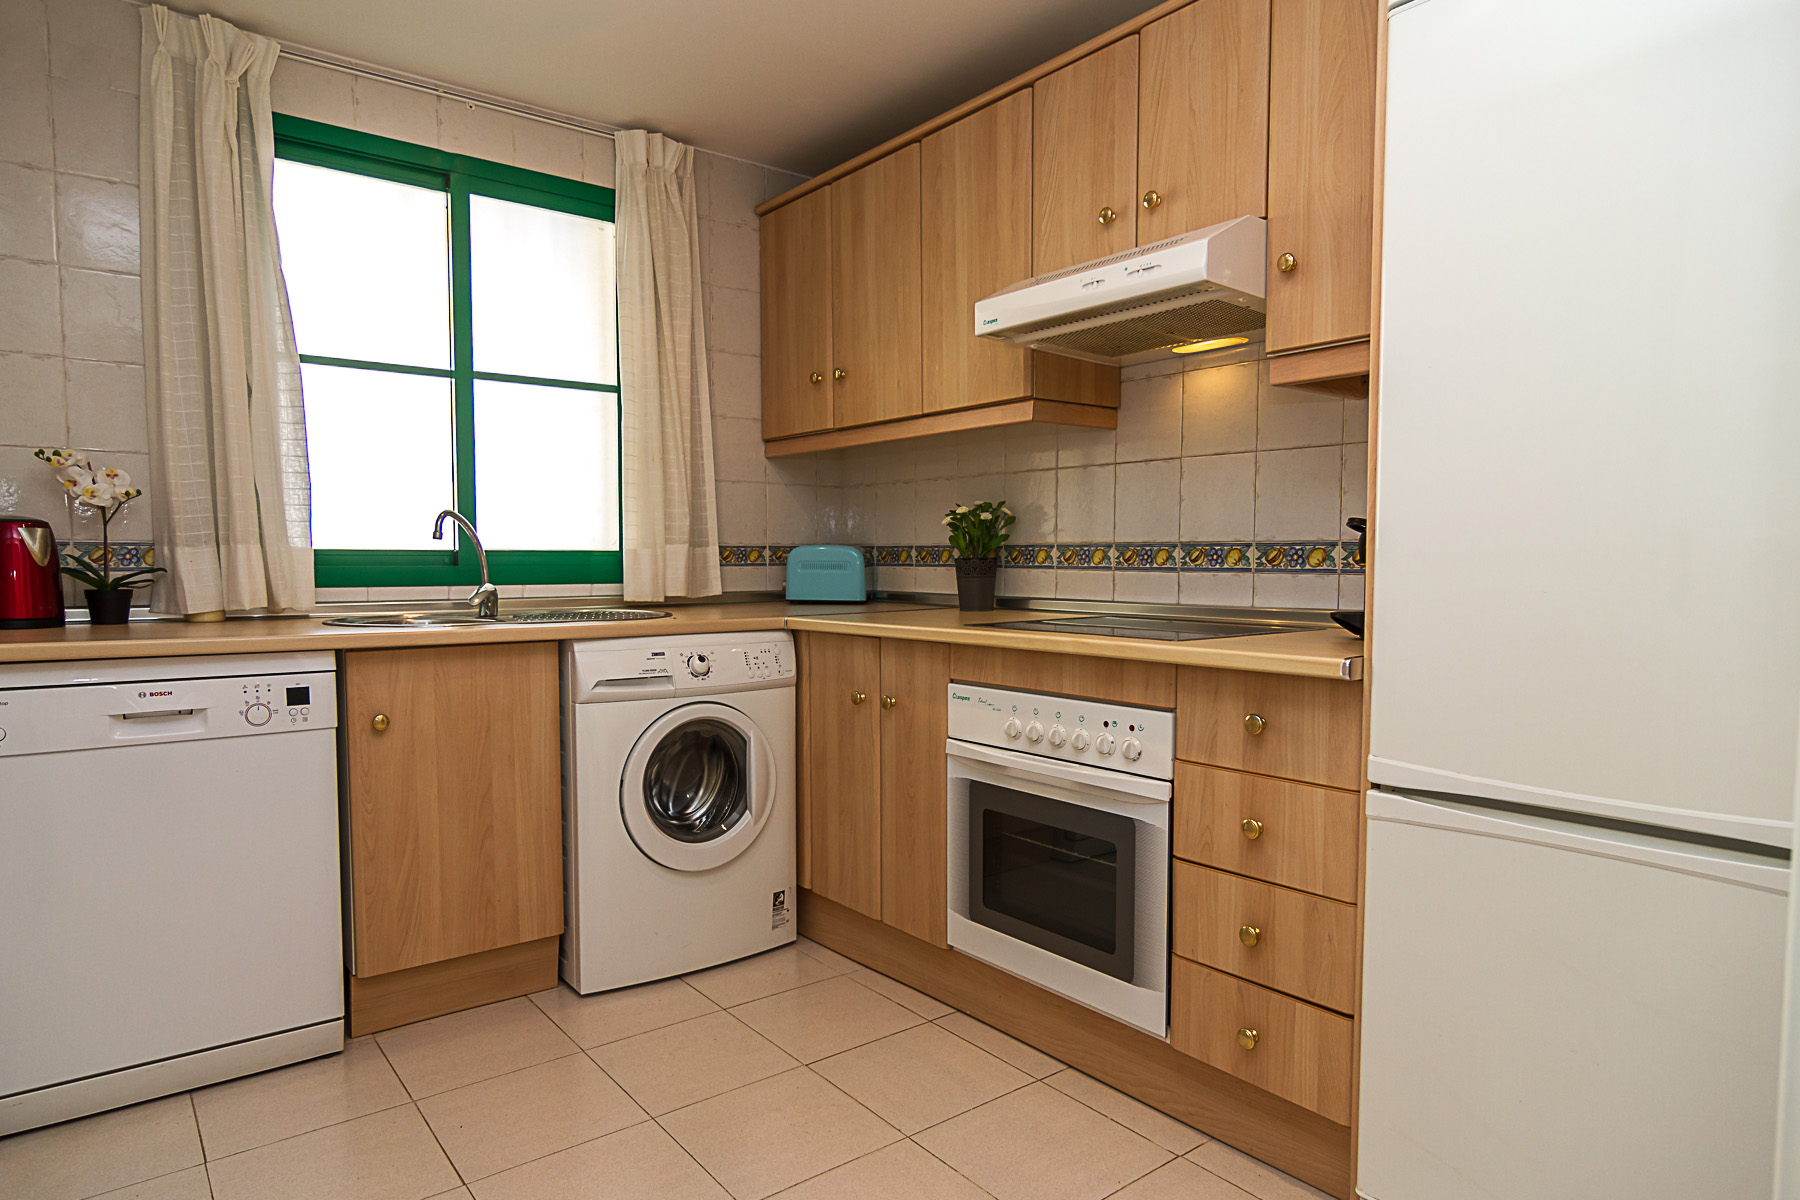 Image shows kitchen with washing machine and dishwaher